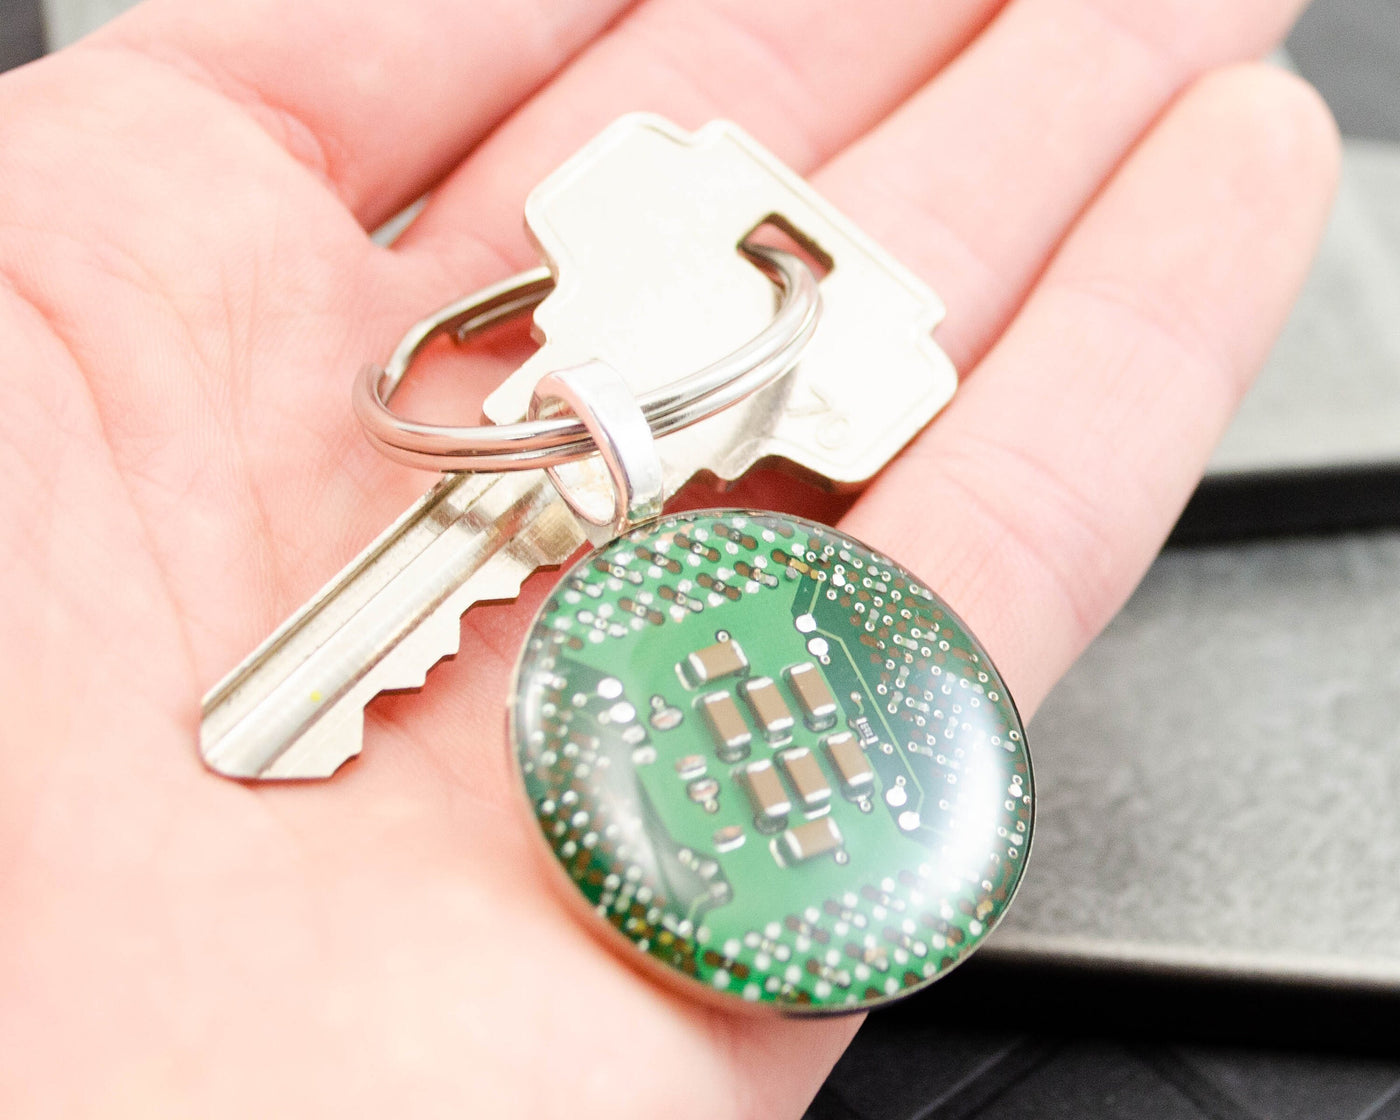 Green Circuit Board Keychain, Wearable Technology, Computer Engineer Gift, Industrial Chic, Computer Science Gift, Techie Gift, Geek Gift